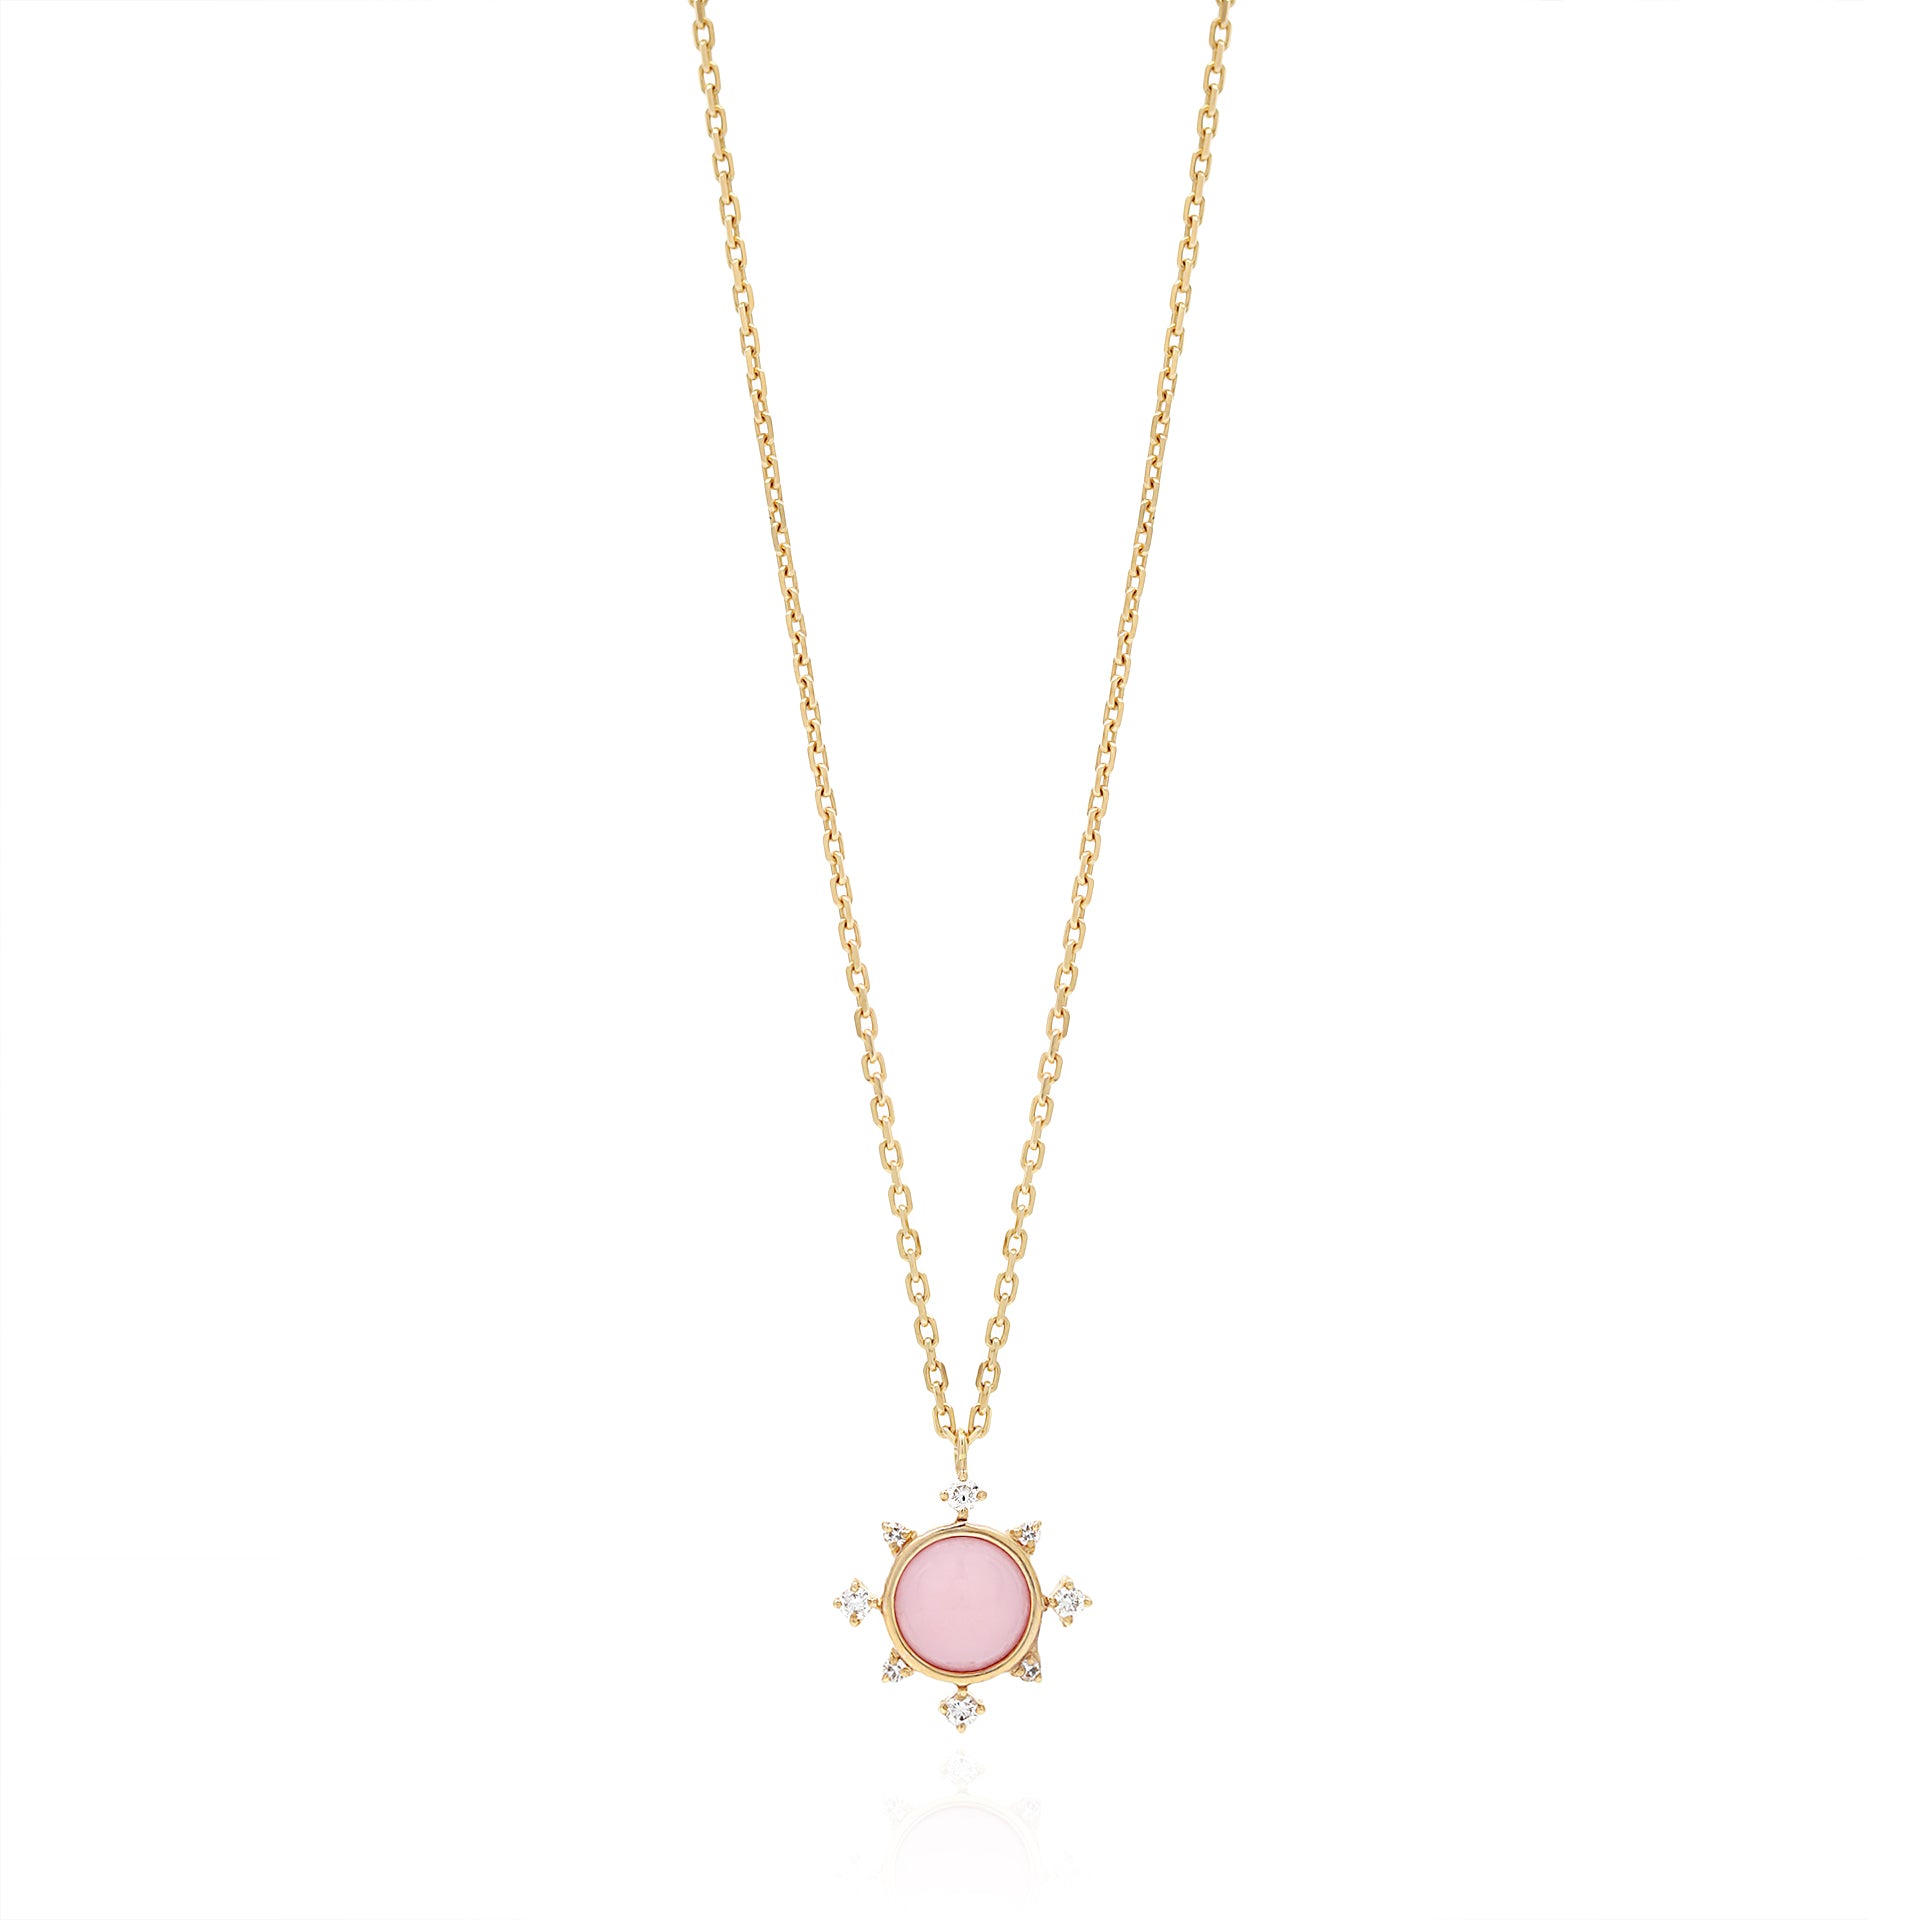 Melati Rise necklace in Yellow Gold with Pink Opal and diamonds